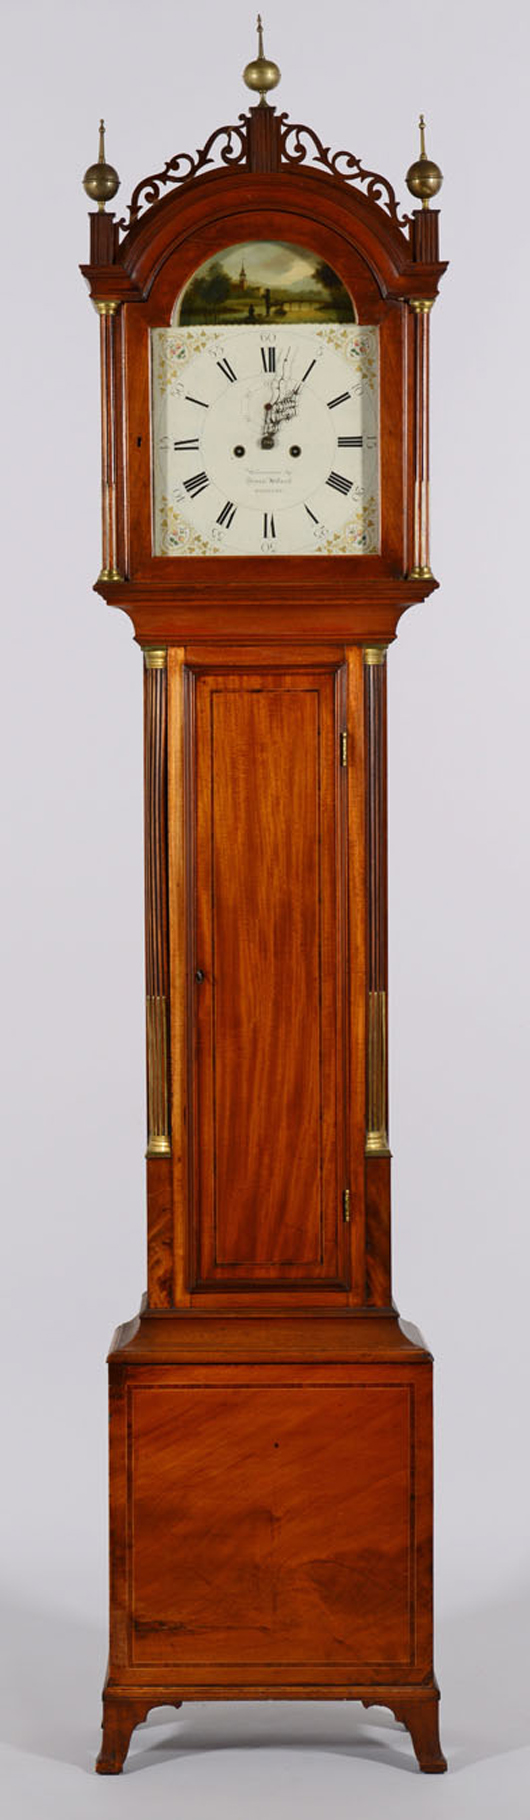 A Simon Willard tall case clock with original Isaiah Thomas paper label inside the waist door is estimated at $35,000-45,000. Case Antiques image.